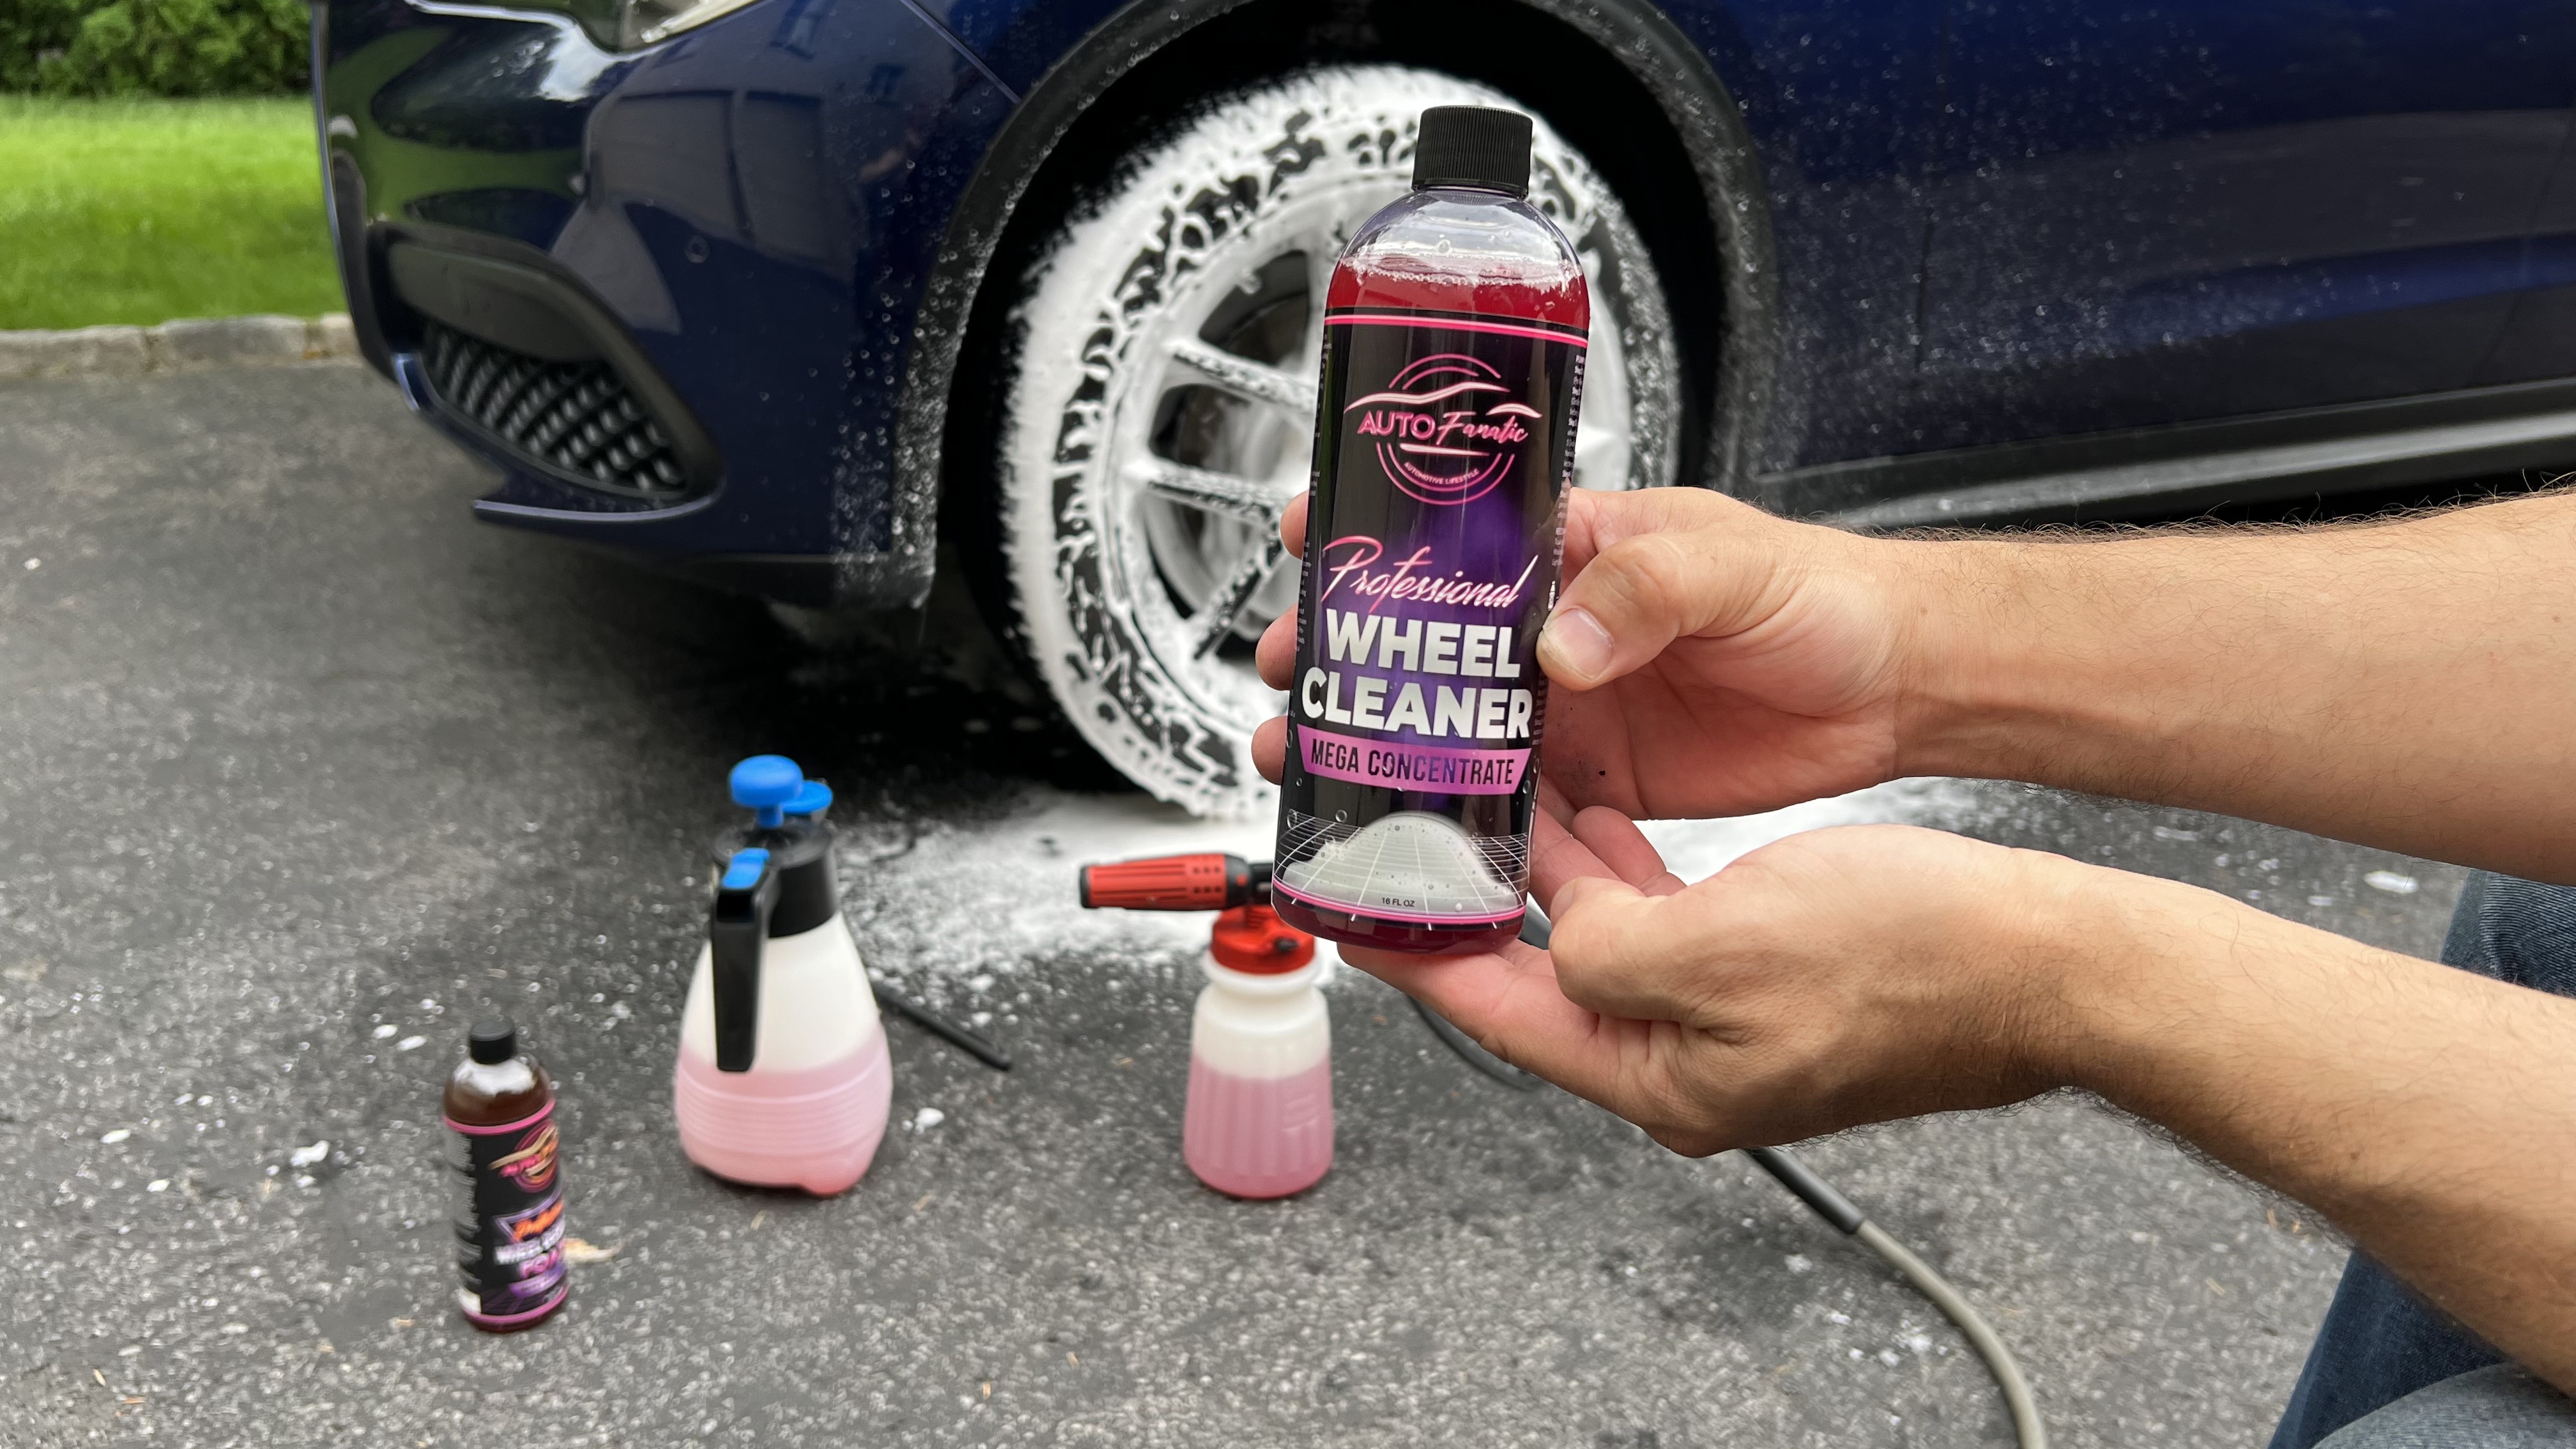 Adam’s Wheel & Tire Cleaner 2-Pack - Professional All in One Tire & Wheel Cleaner Use w/Wheel Brush & Tire Brush | Car Wash Wheel Cleaning Spray for